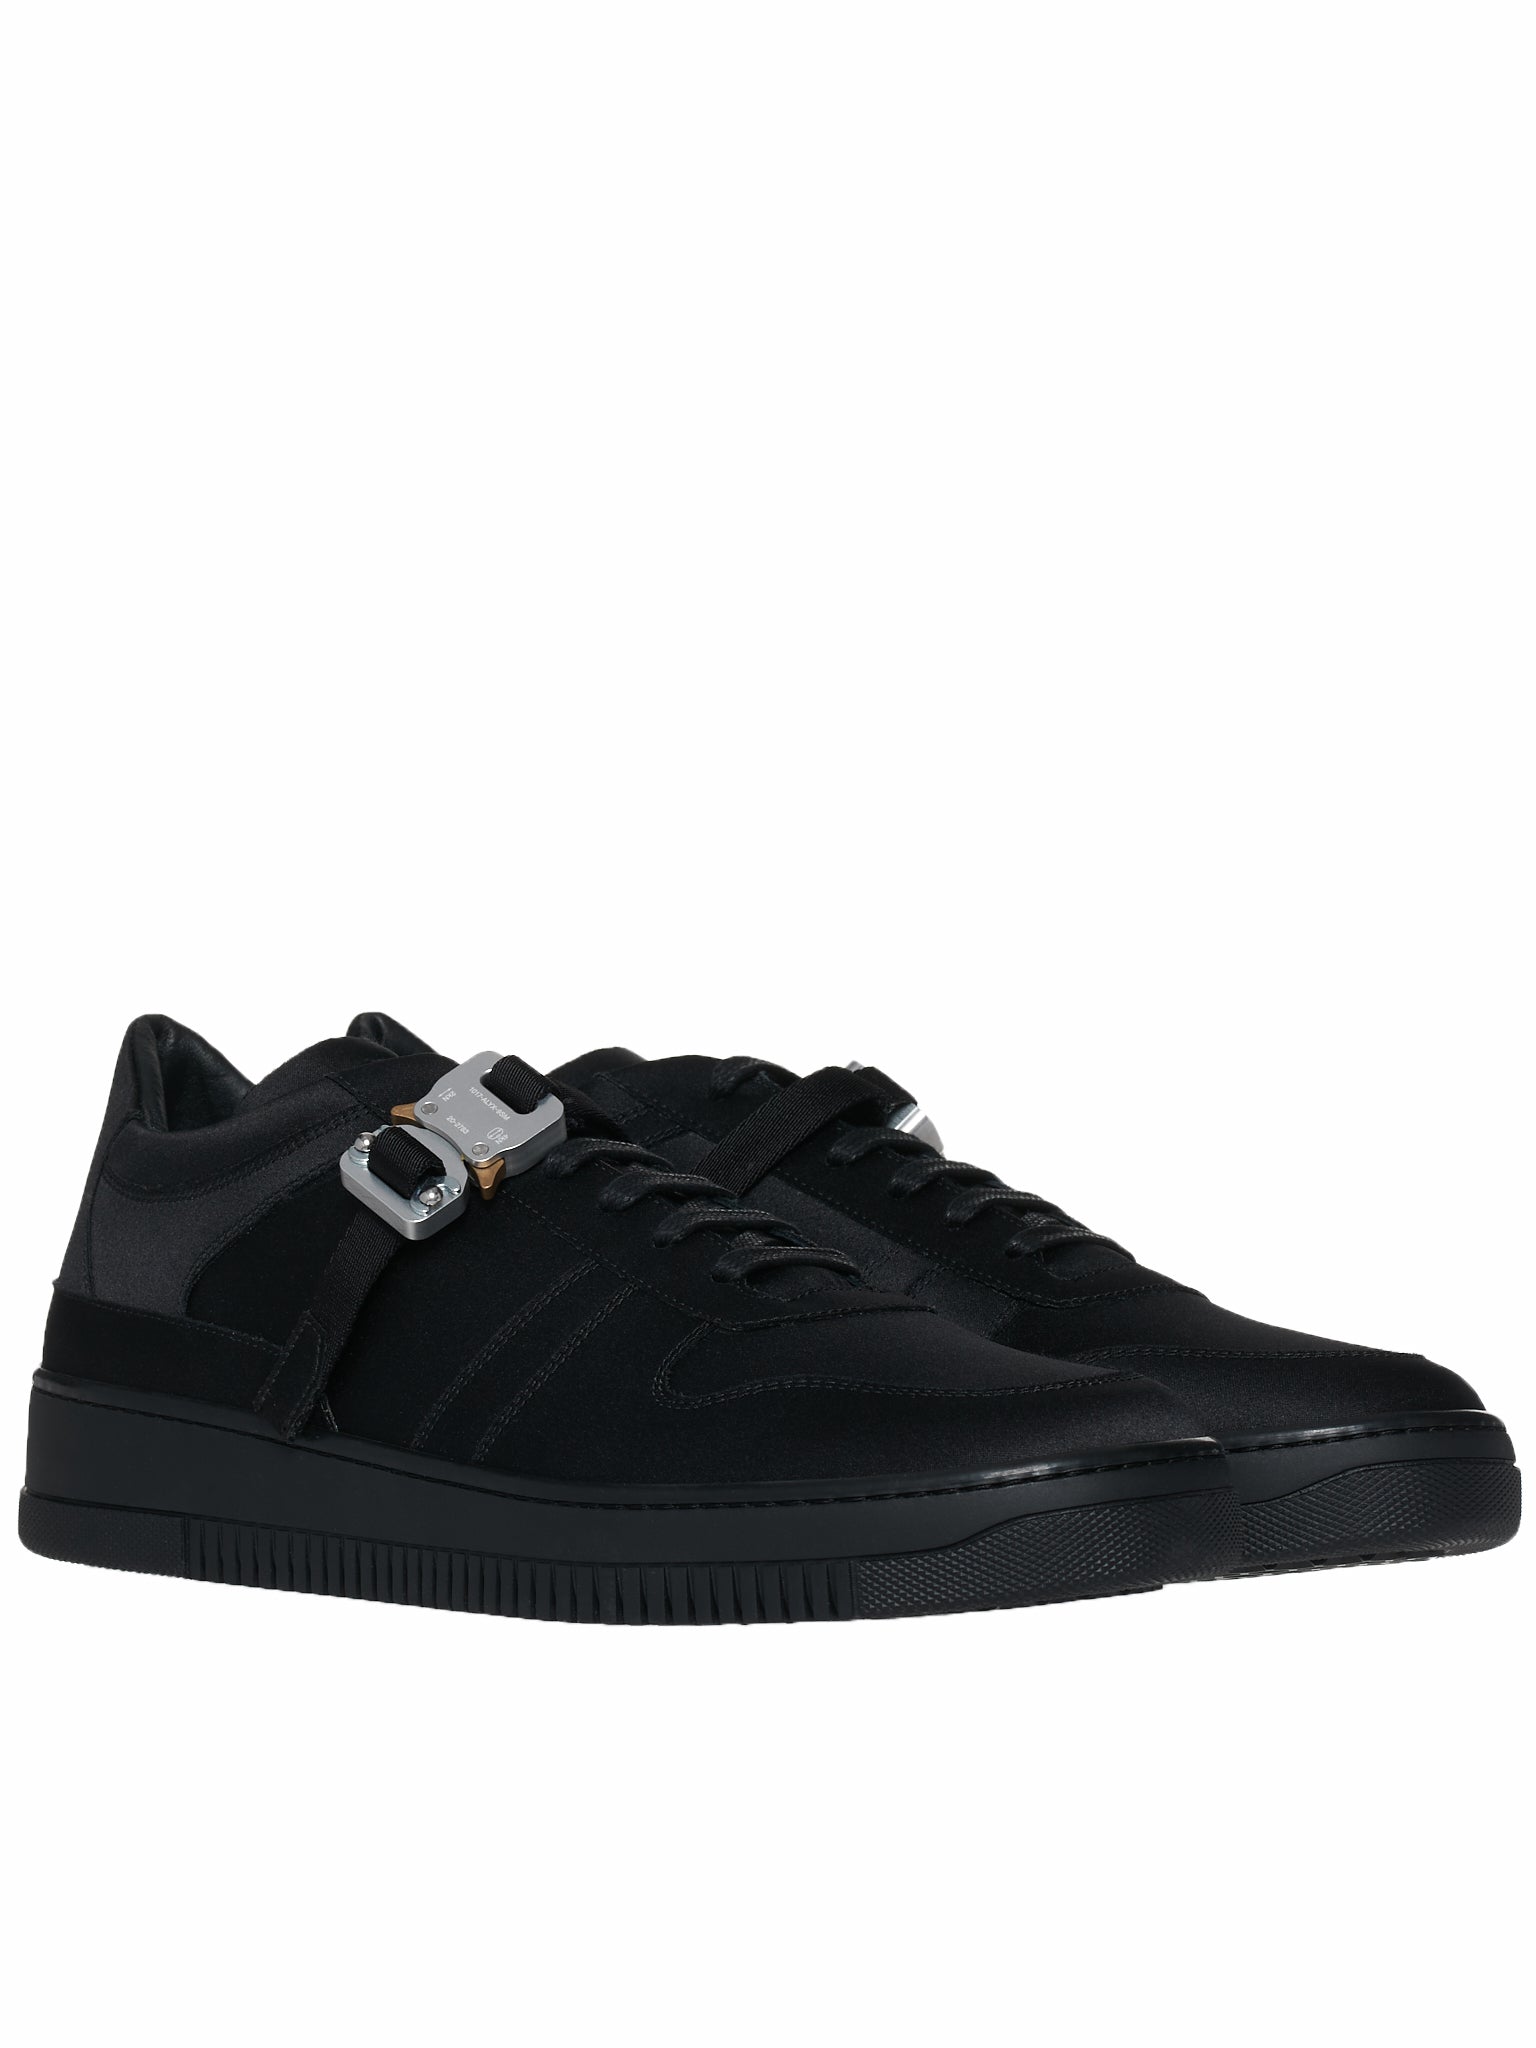 1017 Alyx 9sm Leather Low Top Sneaker